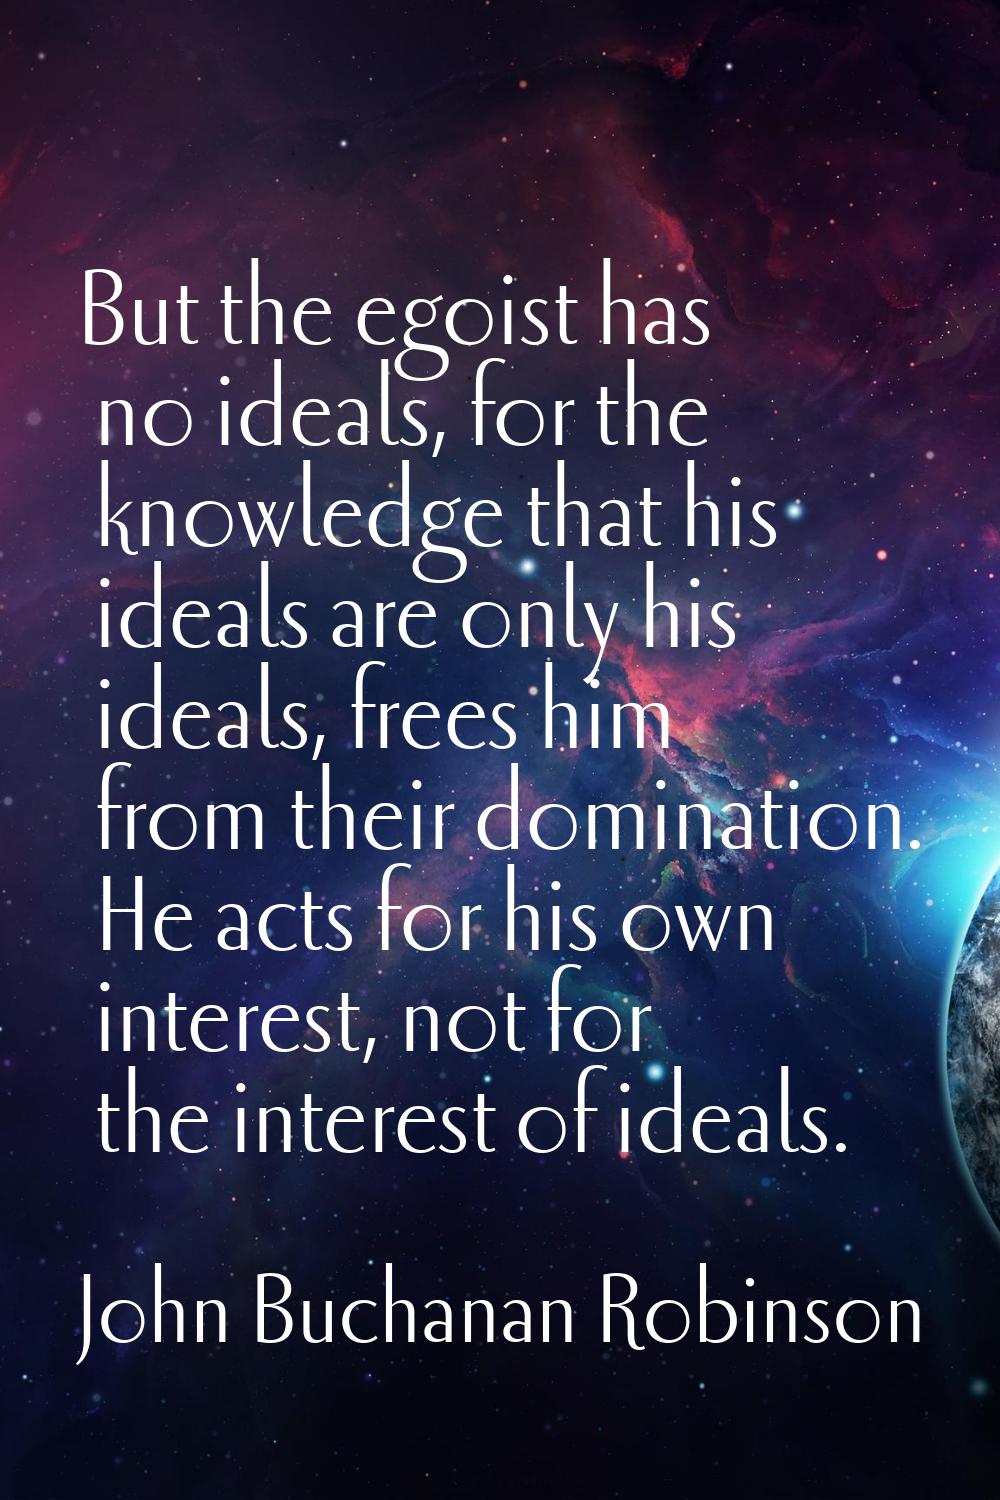 But the egoist has no ideals, for the knowledge that his ideals are only his ideals, frees him from